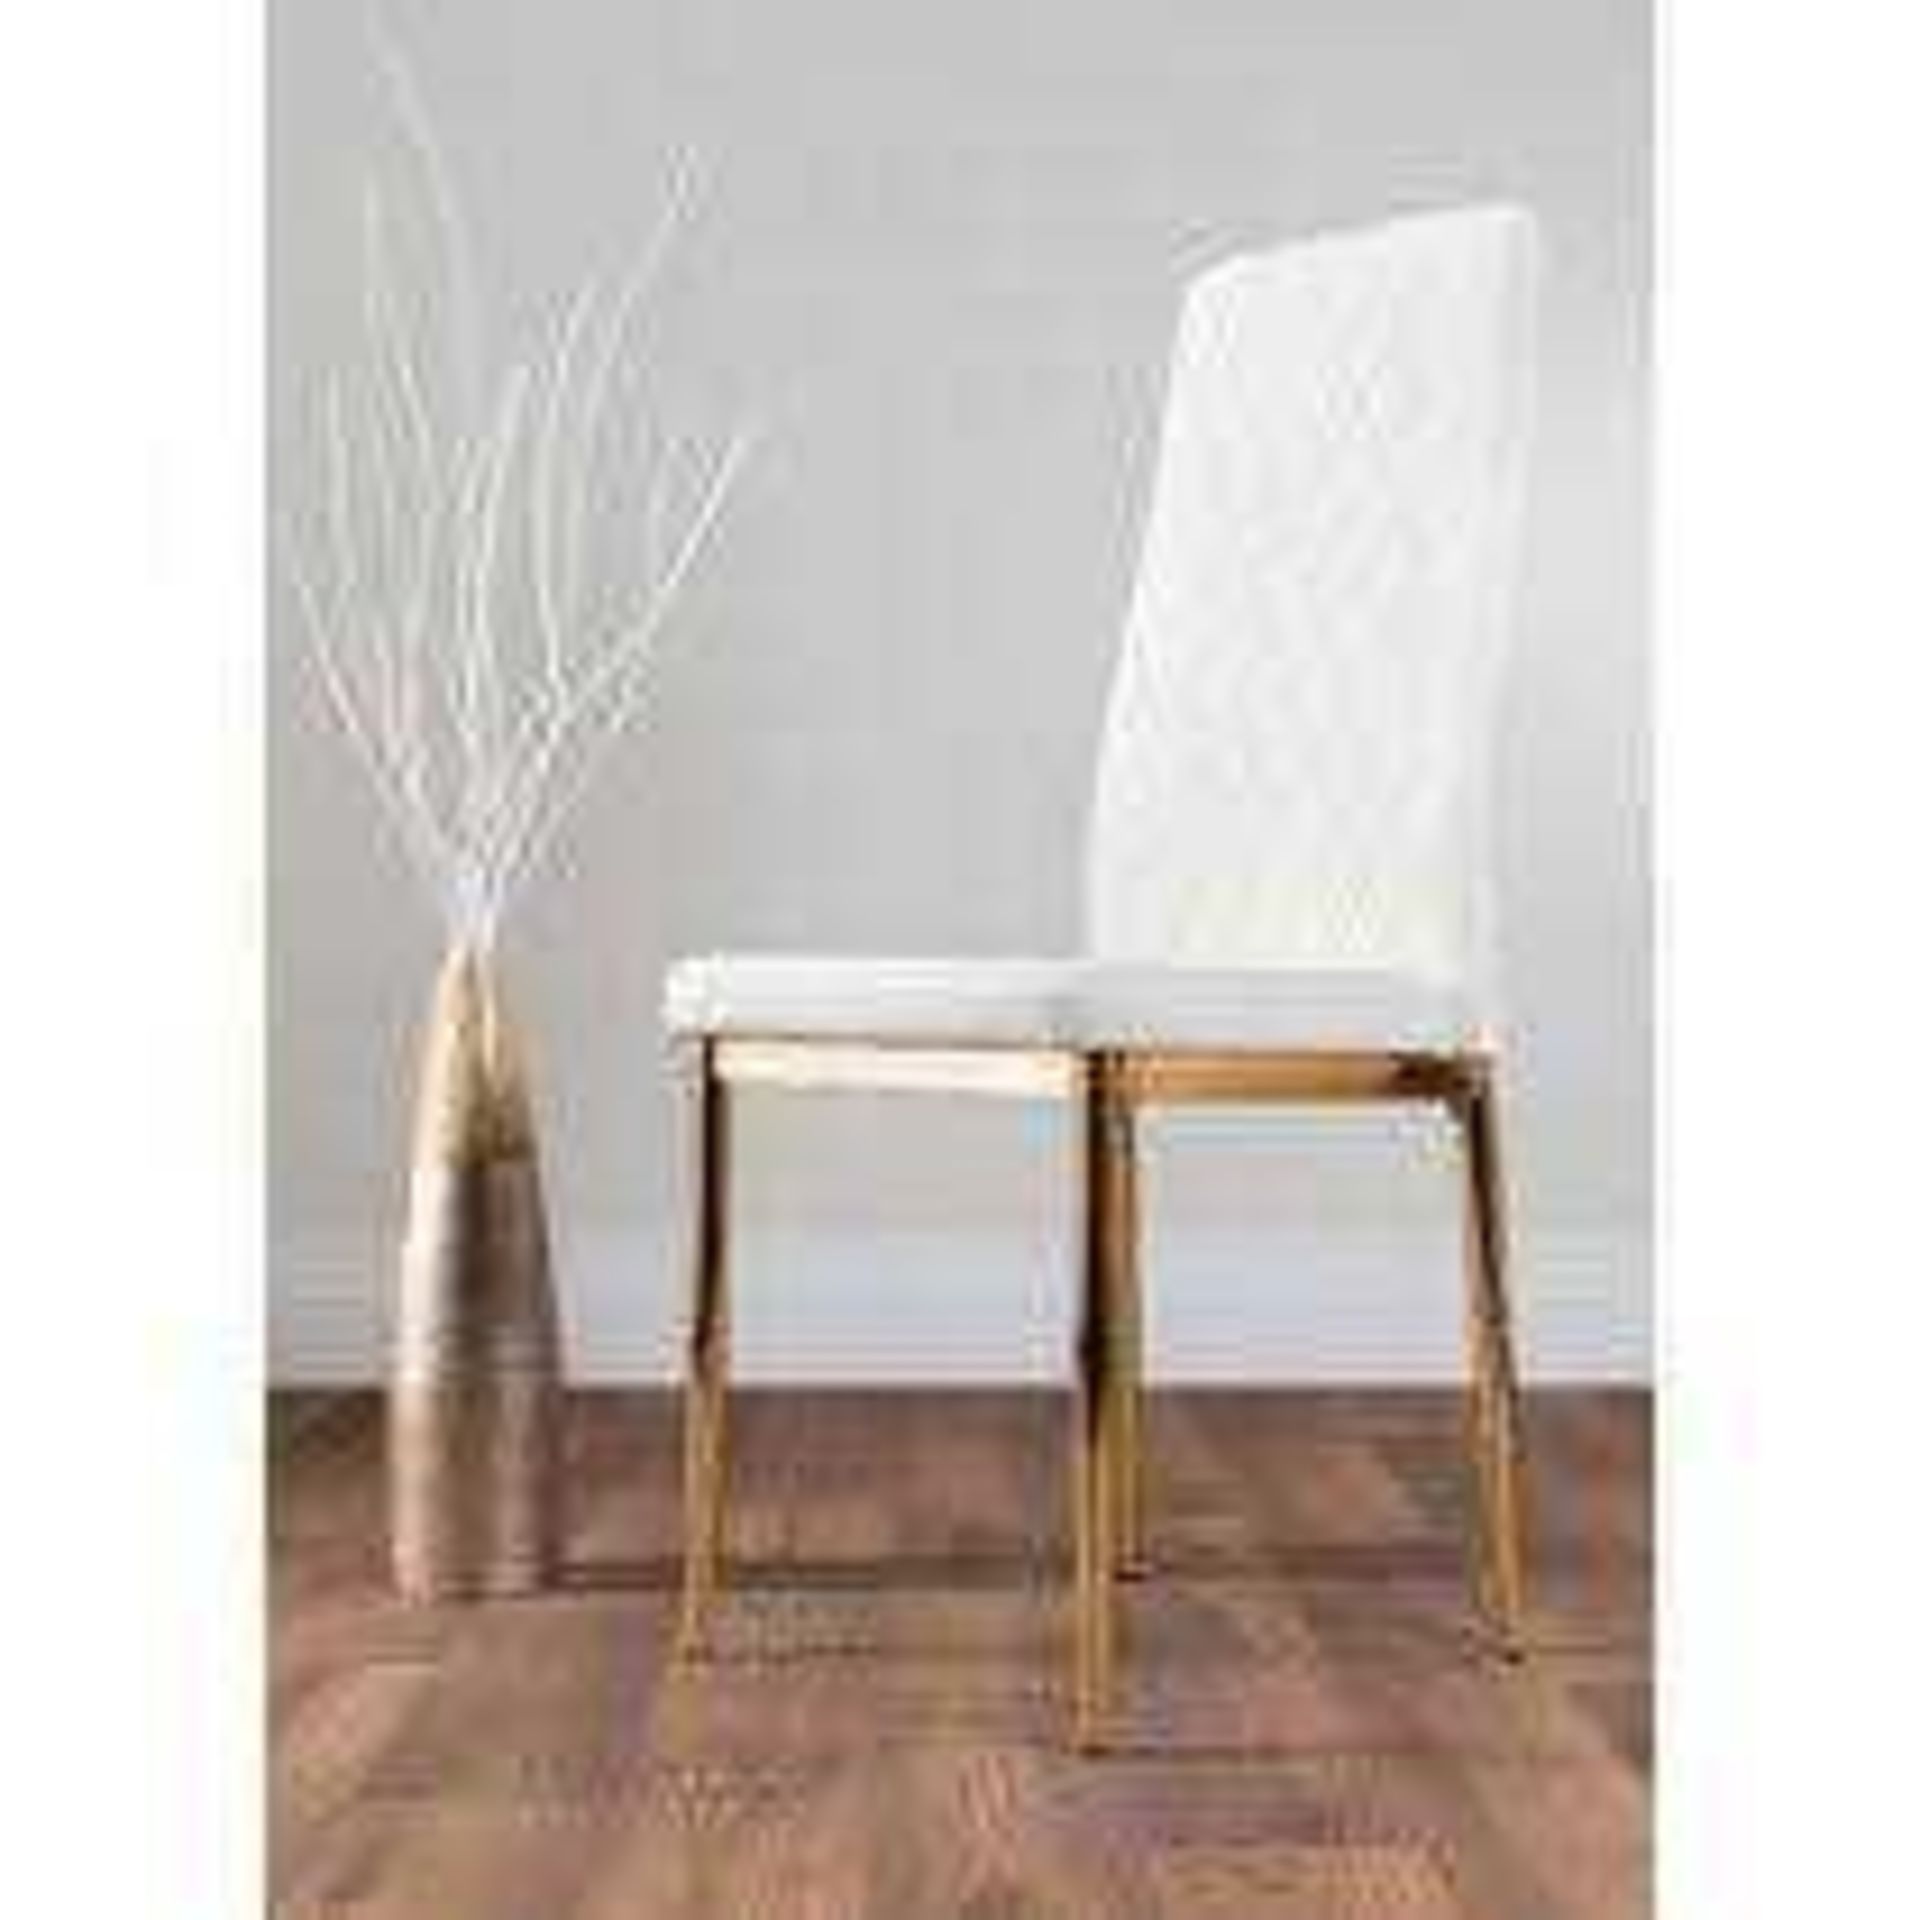 RRP £150 Unboxed 3X White Leather Stitch Back Dining Chairs With Gold Frame Legs